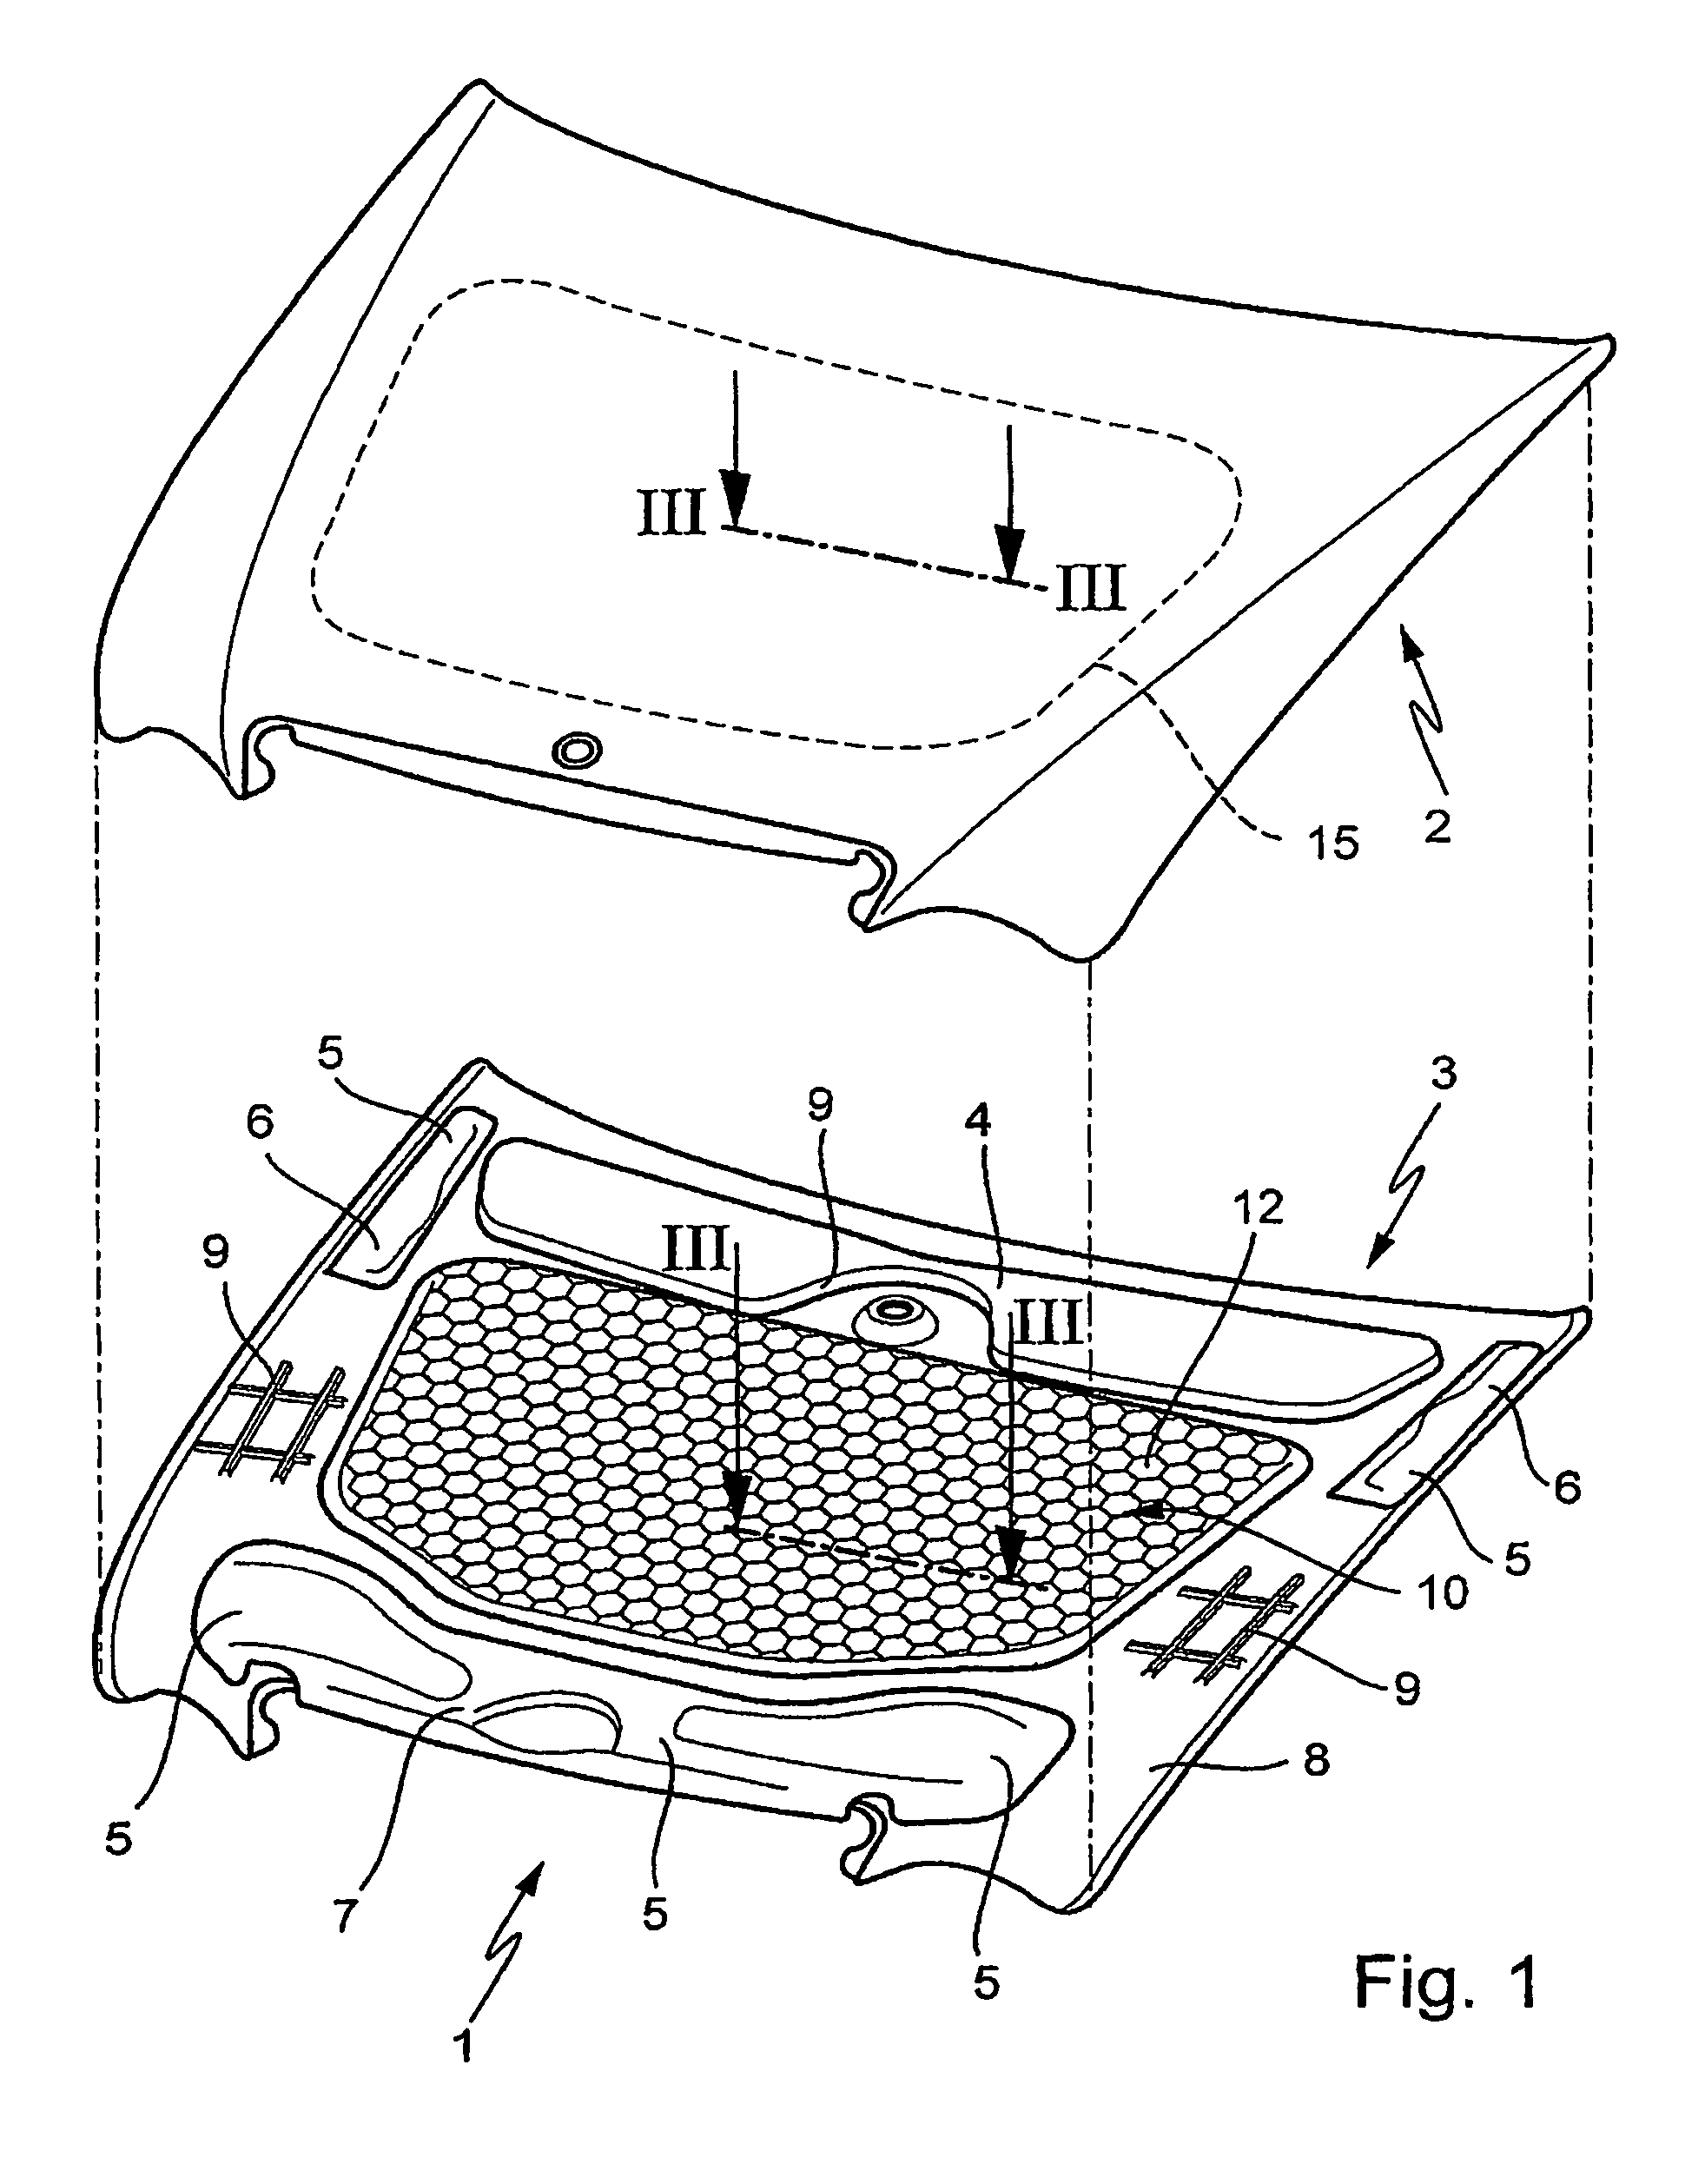 Engine hood comprising a protective device for pedestrians